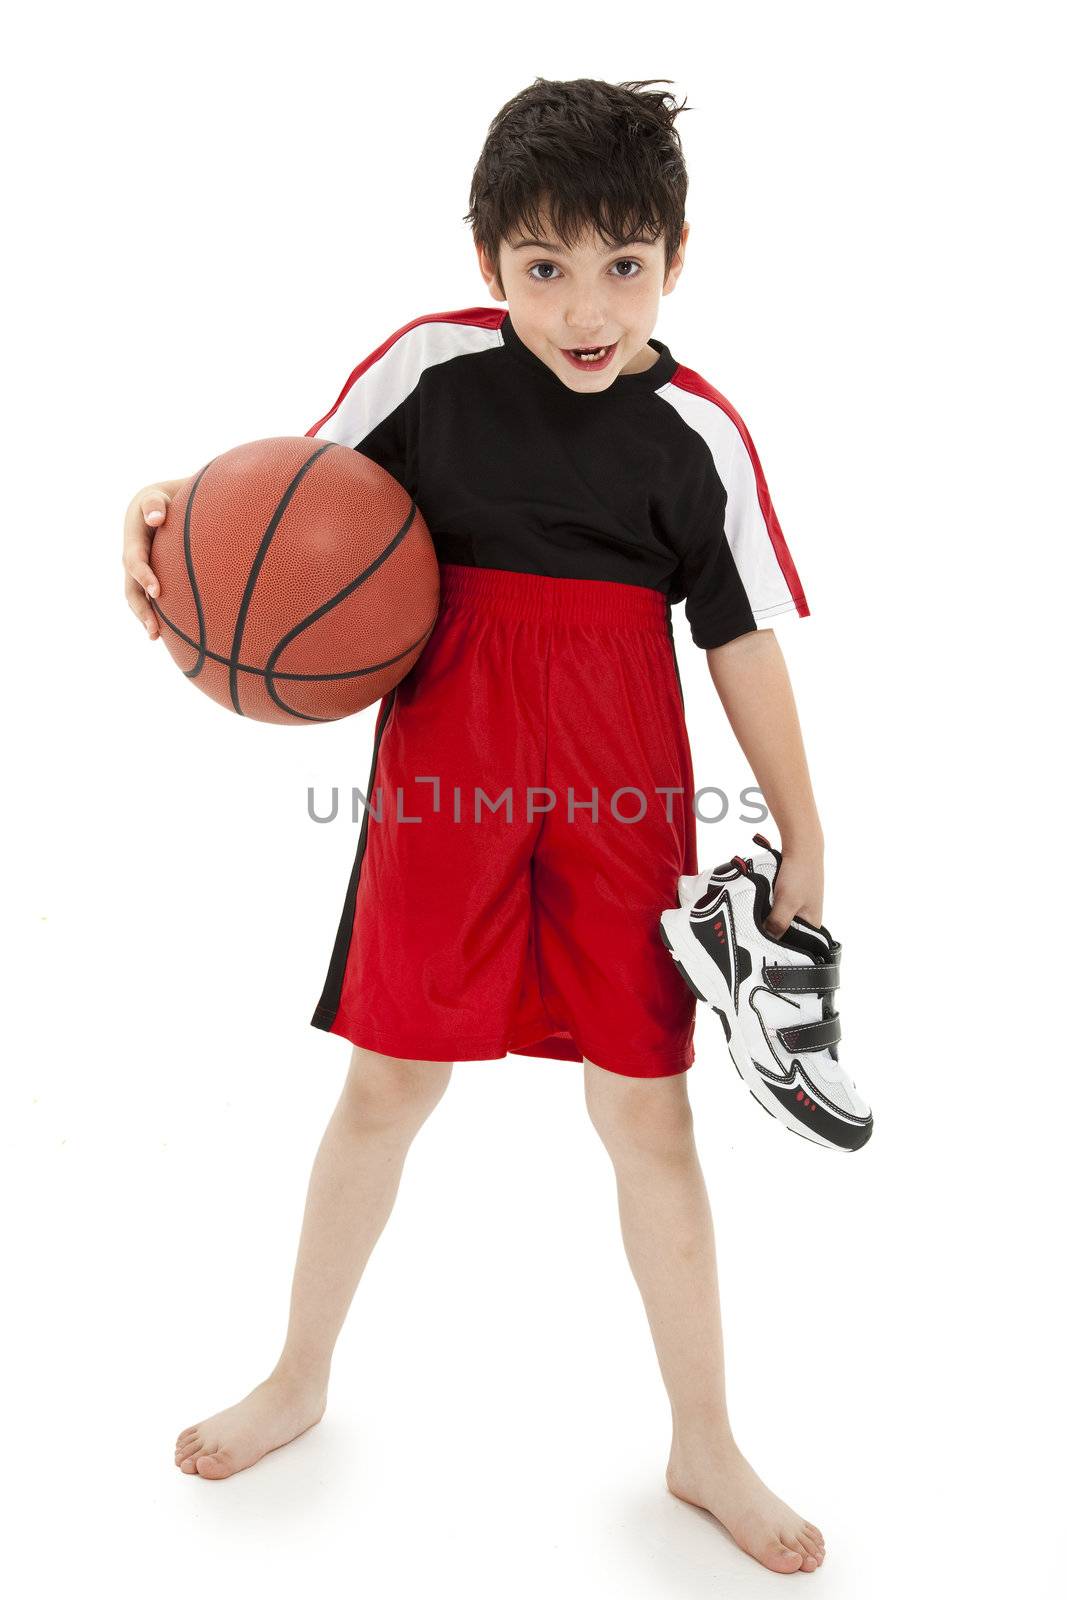 Boy child basketball playiing nerd with ball over white background.